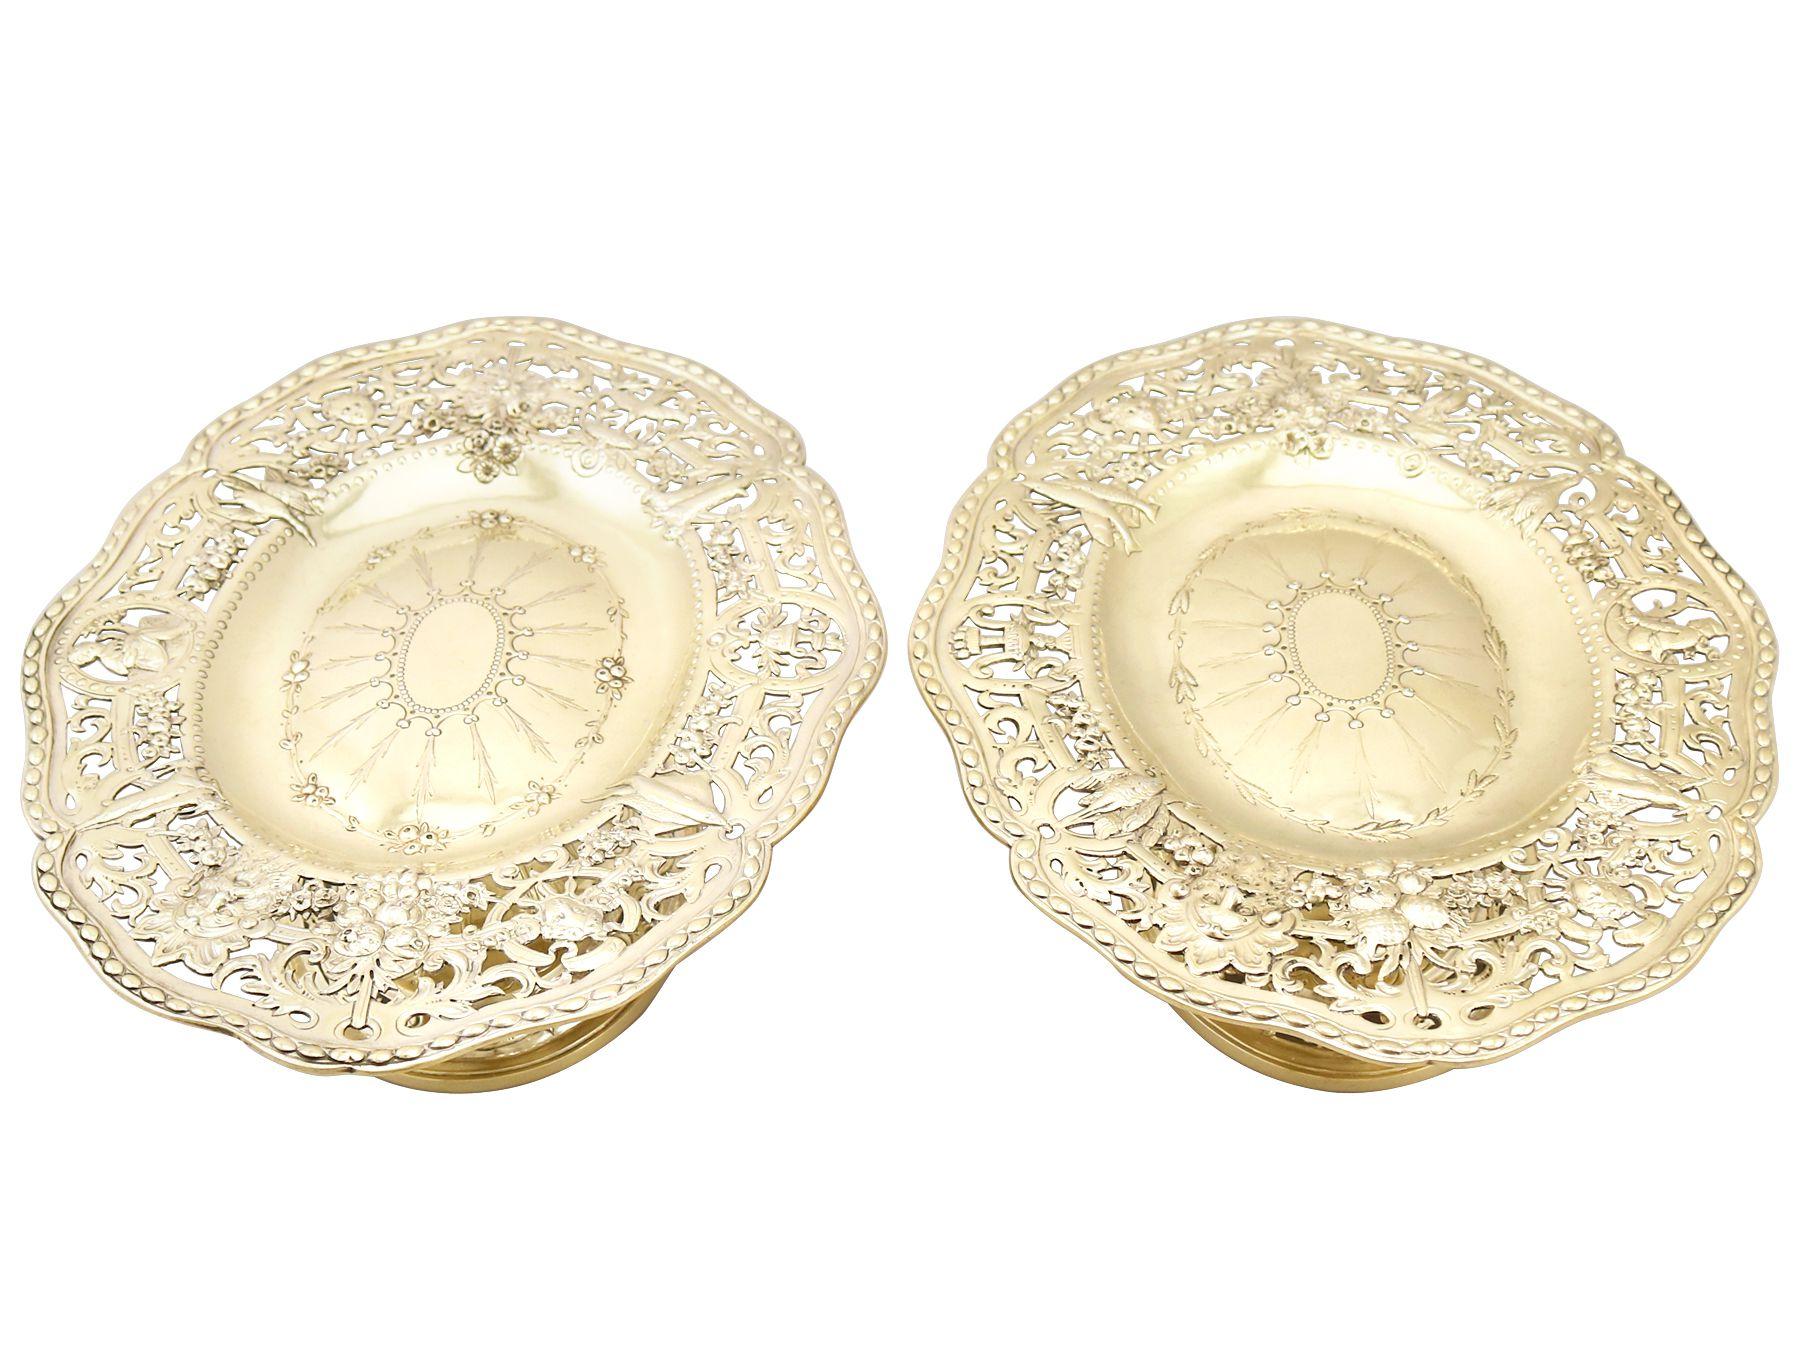 A magnificent, fine and impressive, pair of antique Victorian English sterling silver gilt tazzas / centerpieces; an addition to our silverware collection.

These exceptional antique Victorian sterling silver gilt tazza/centerpieces have an oval